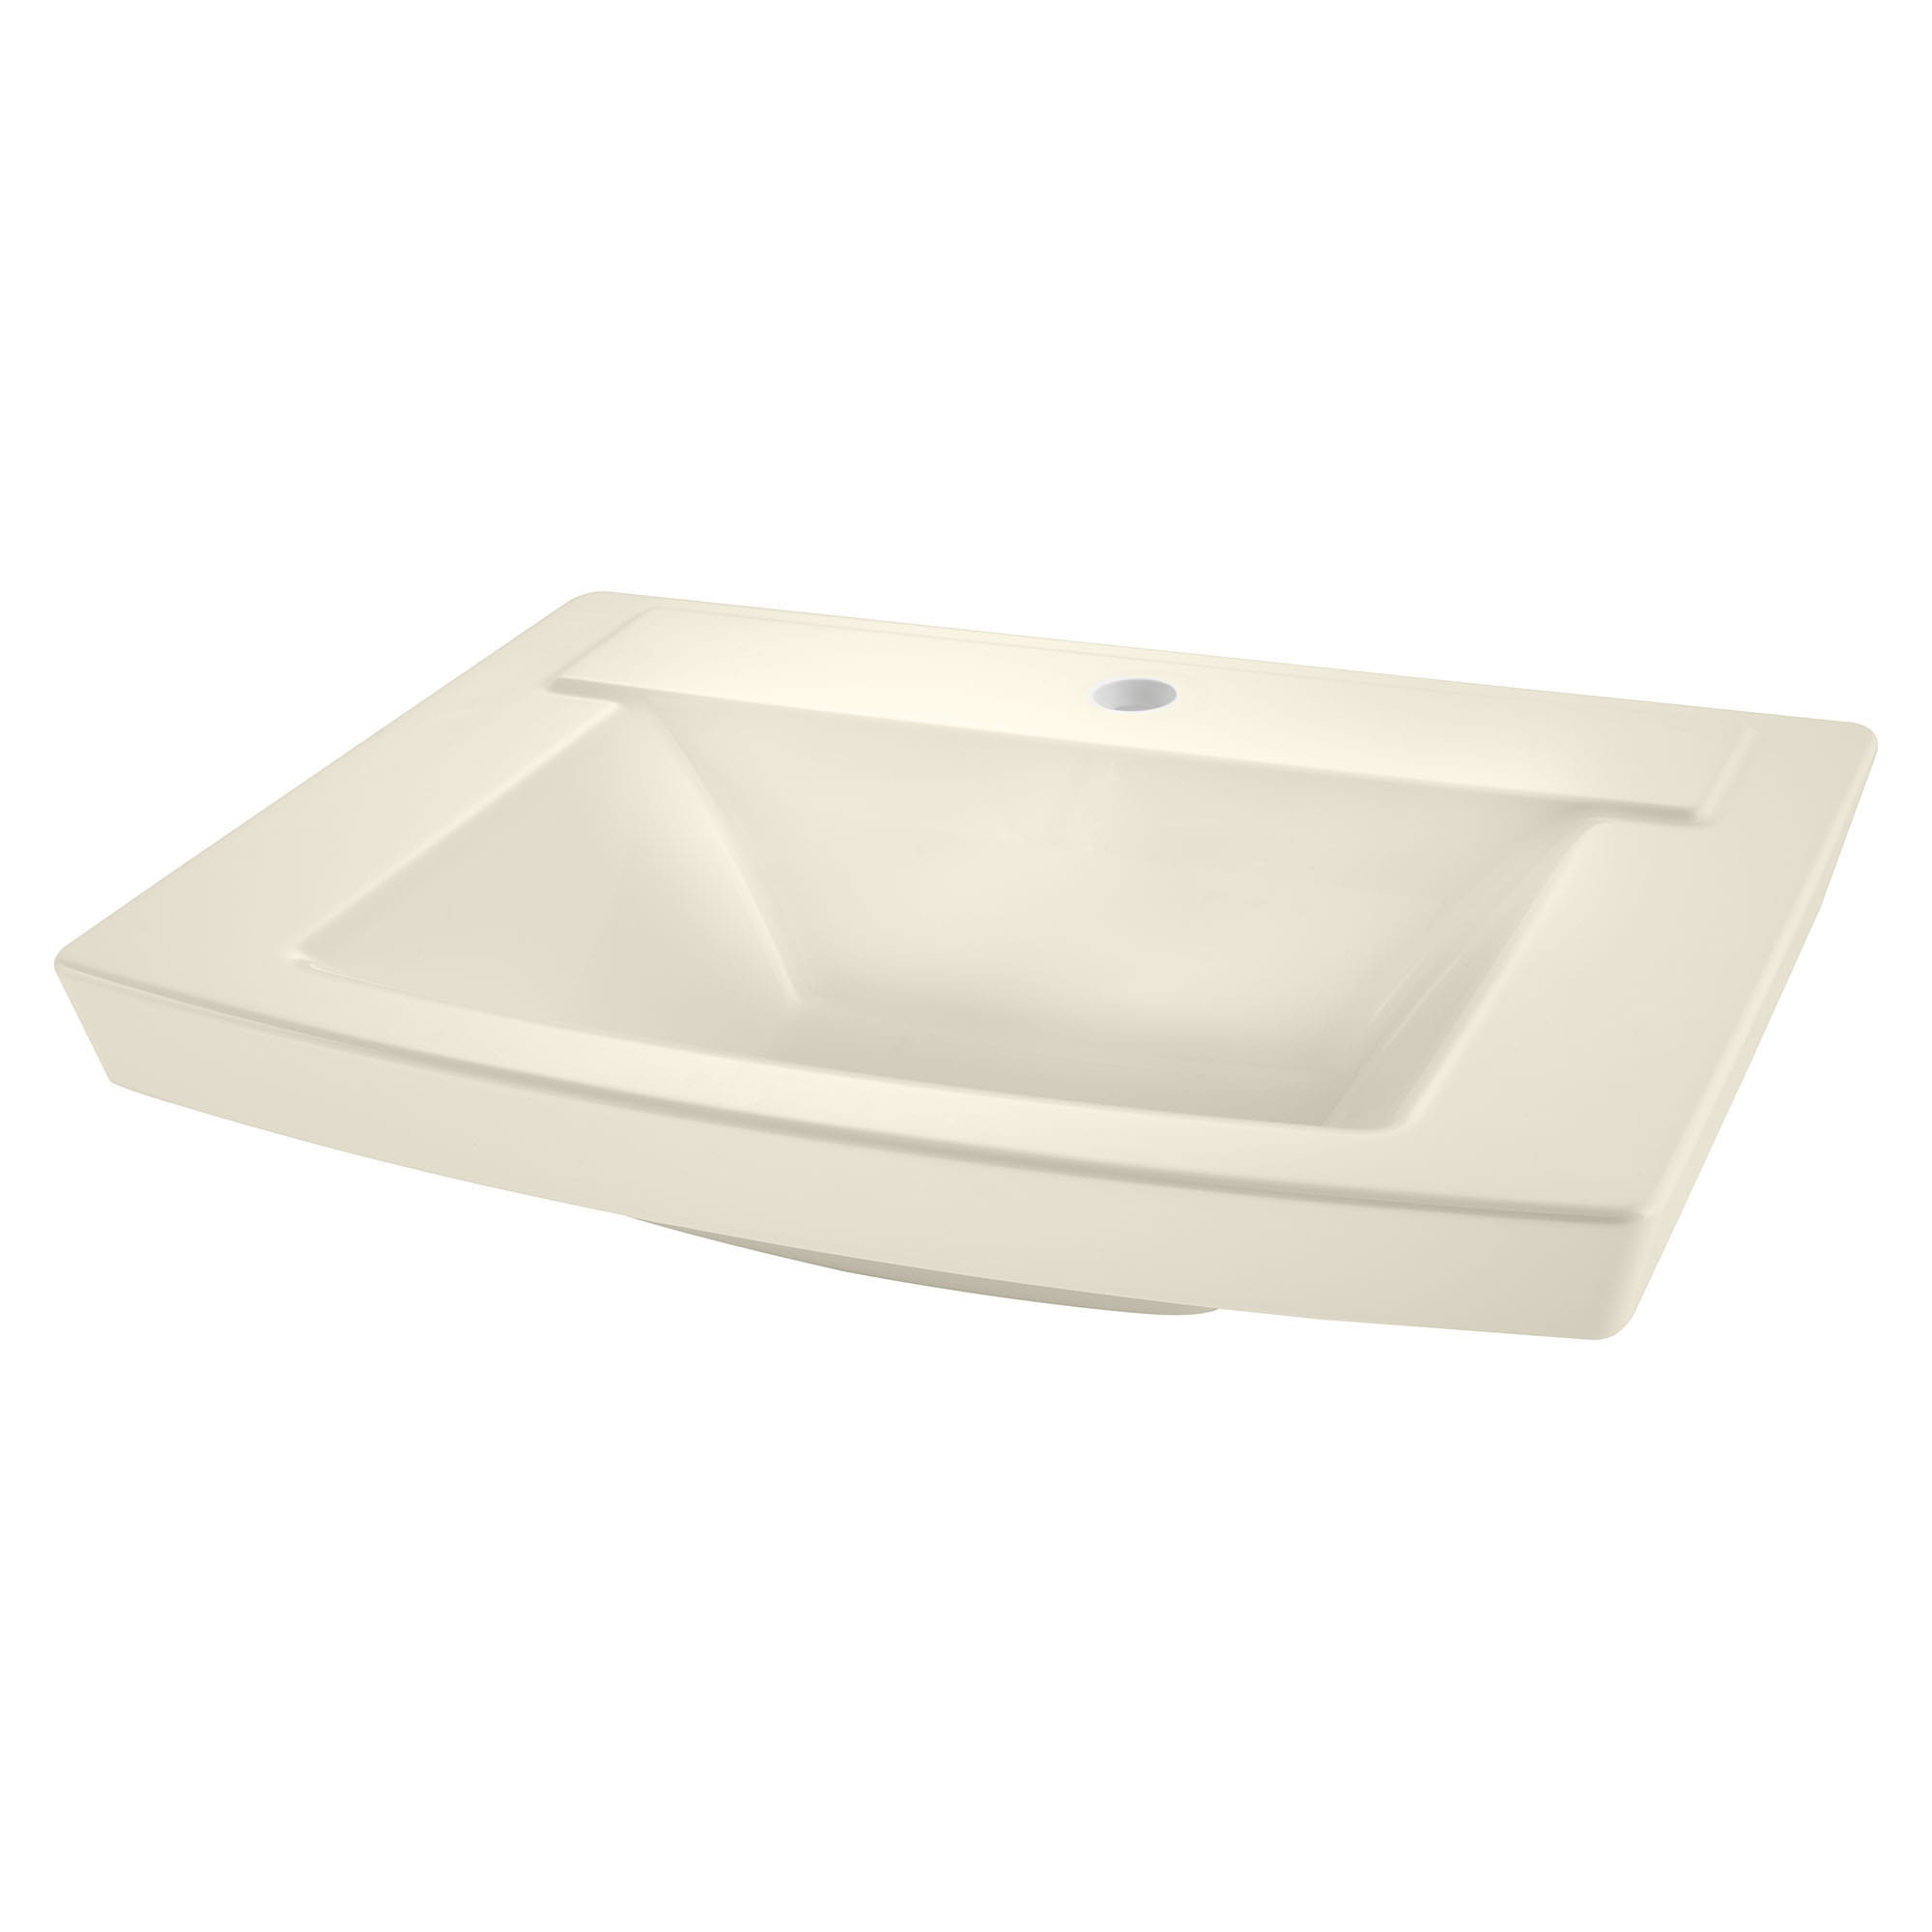 Townsend 24 x 18 Inch Above Counter Sink With Center Hole Only LINEN